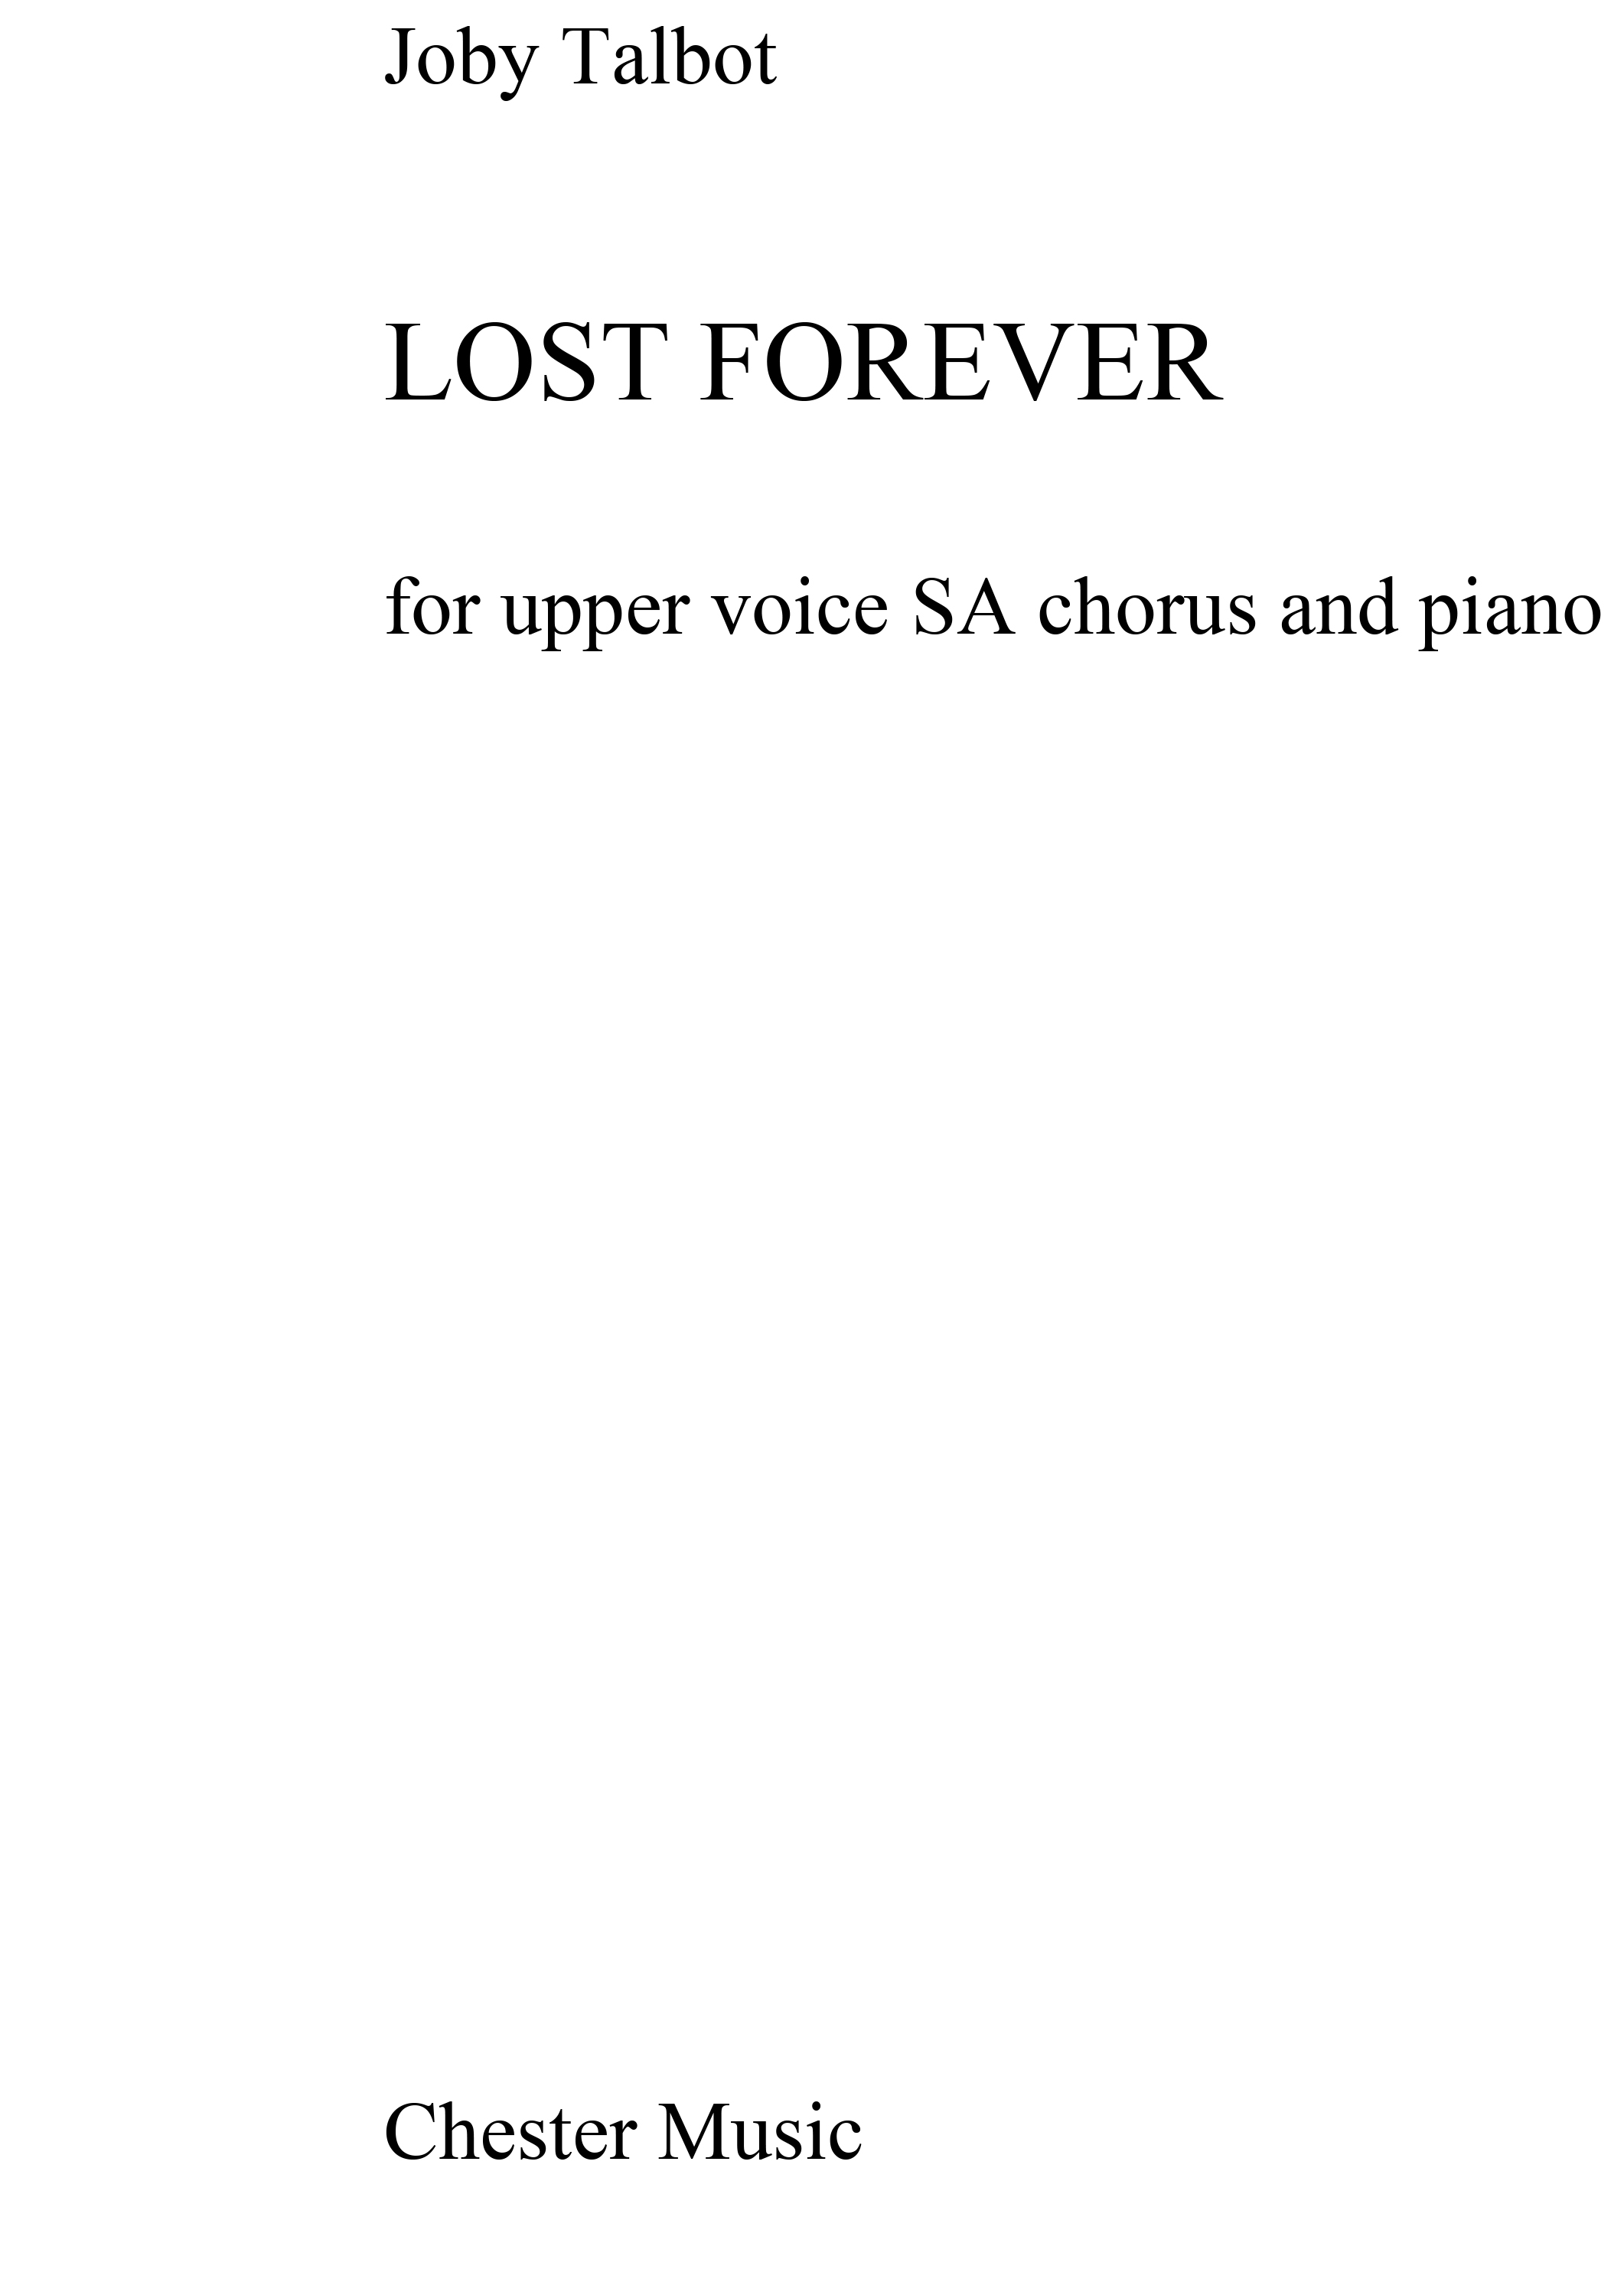 Joby Talbot: Lost Forever (SA/Piano): Upper Voices: Vocal Score